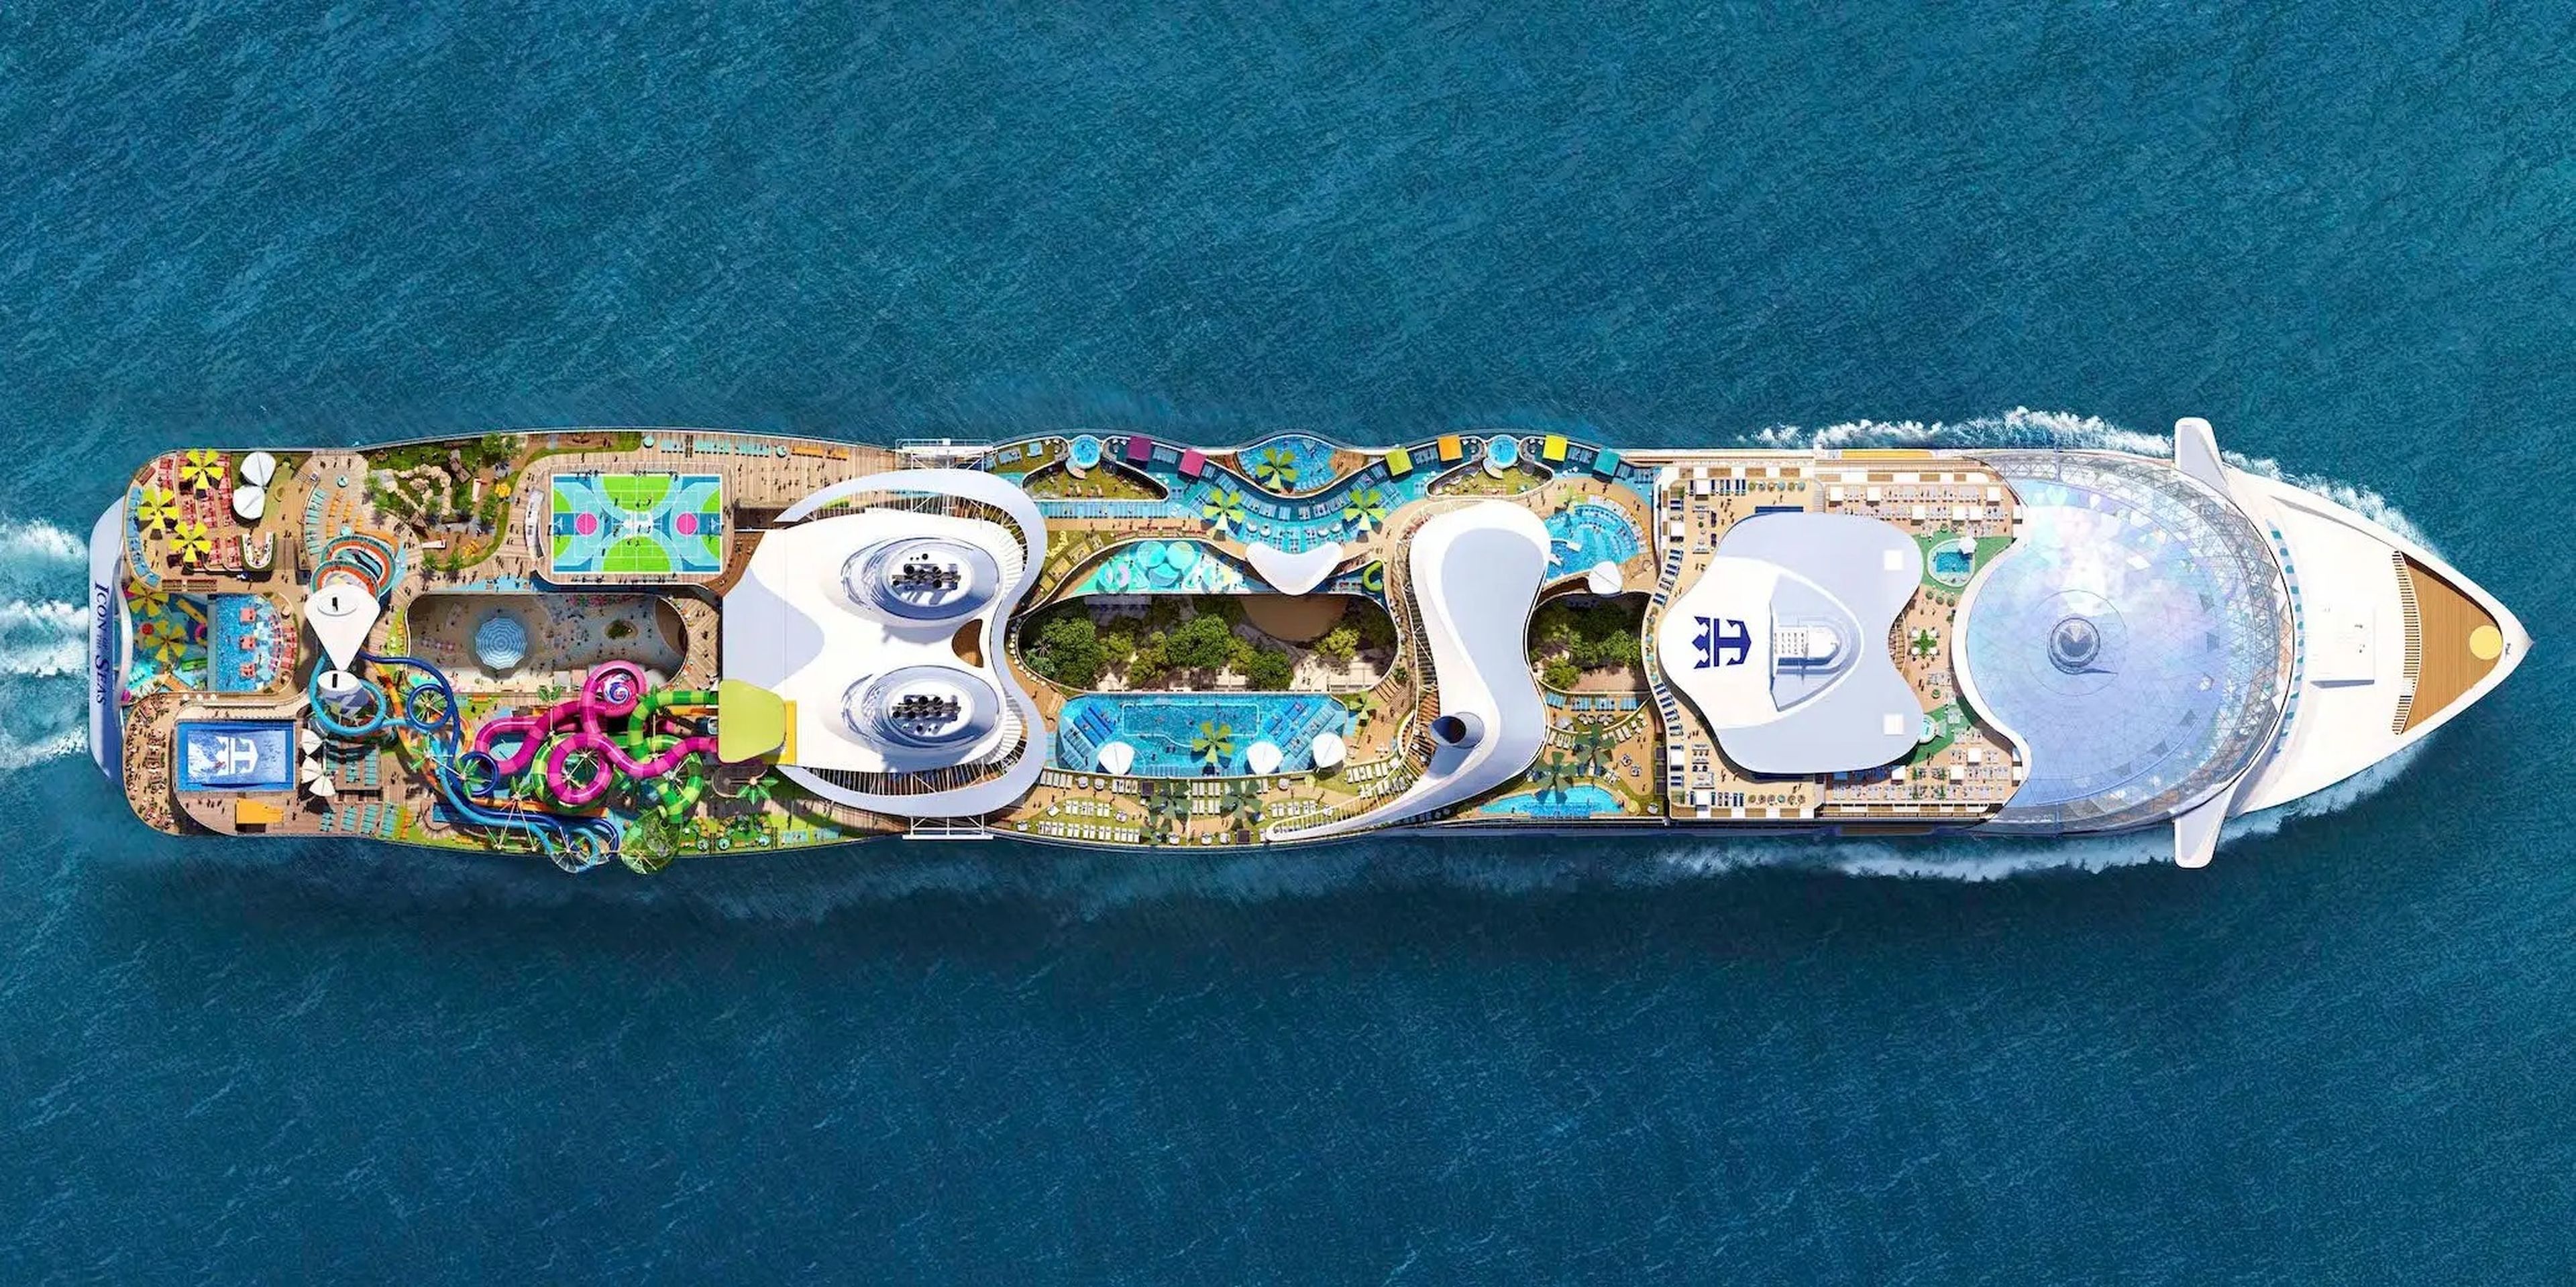 A rendering of Royal Caribbean International's Icon of the Seas cruise ship.